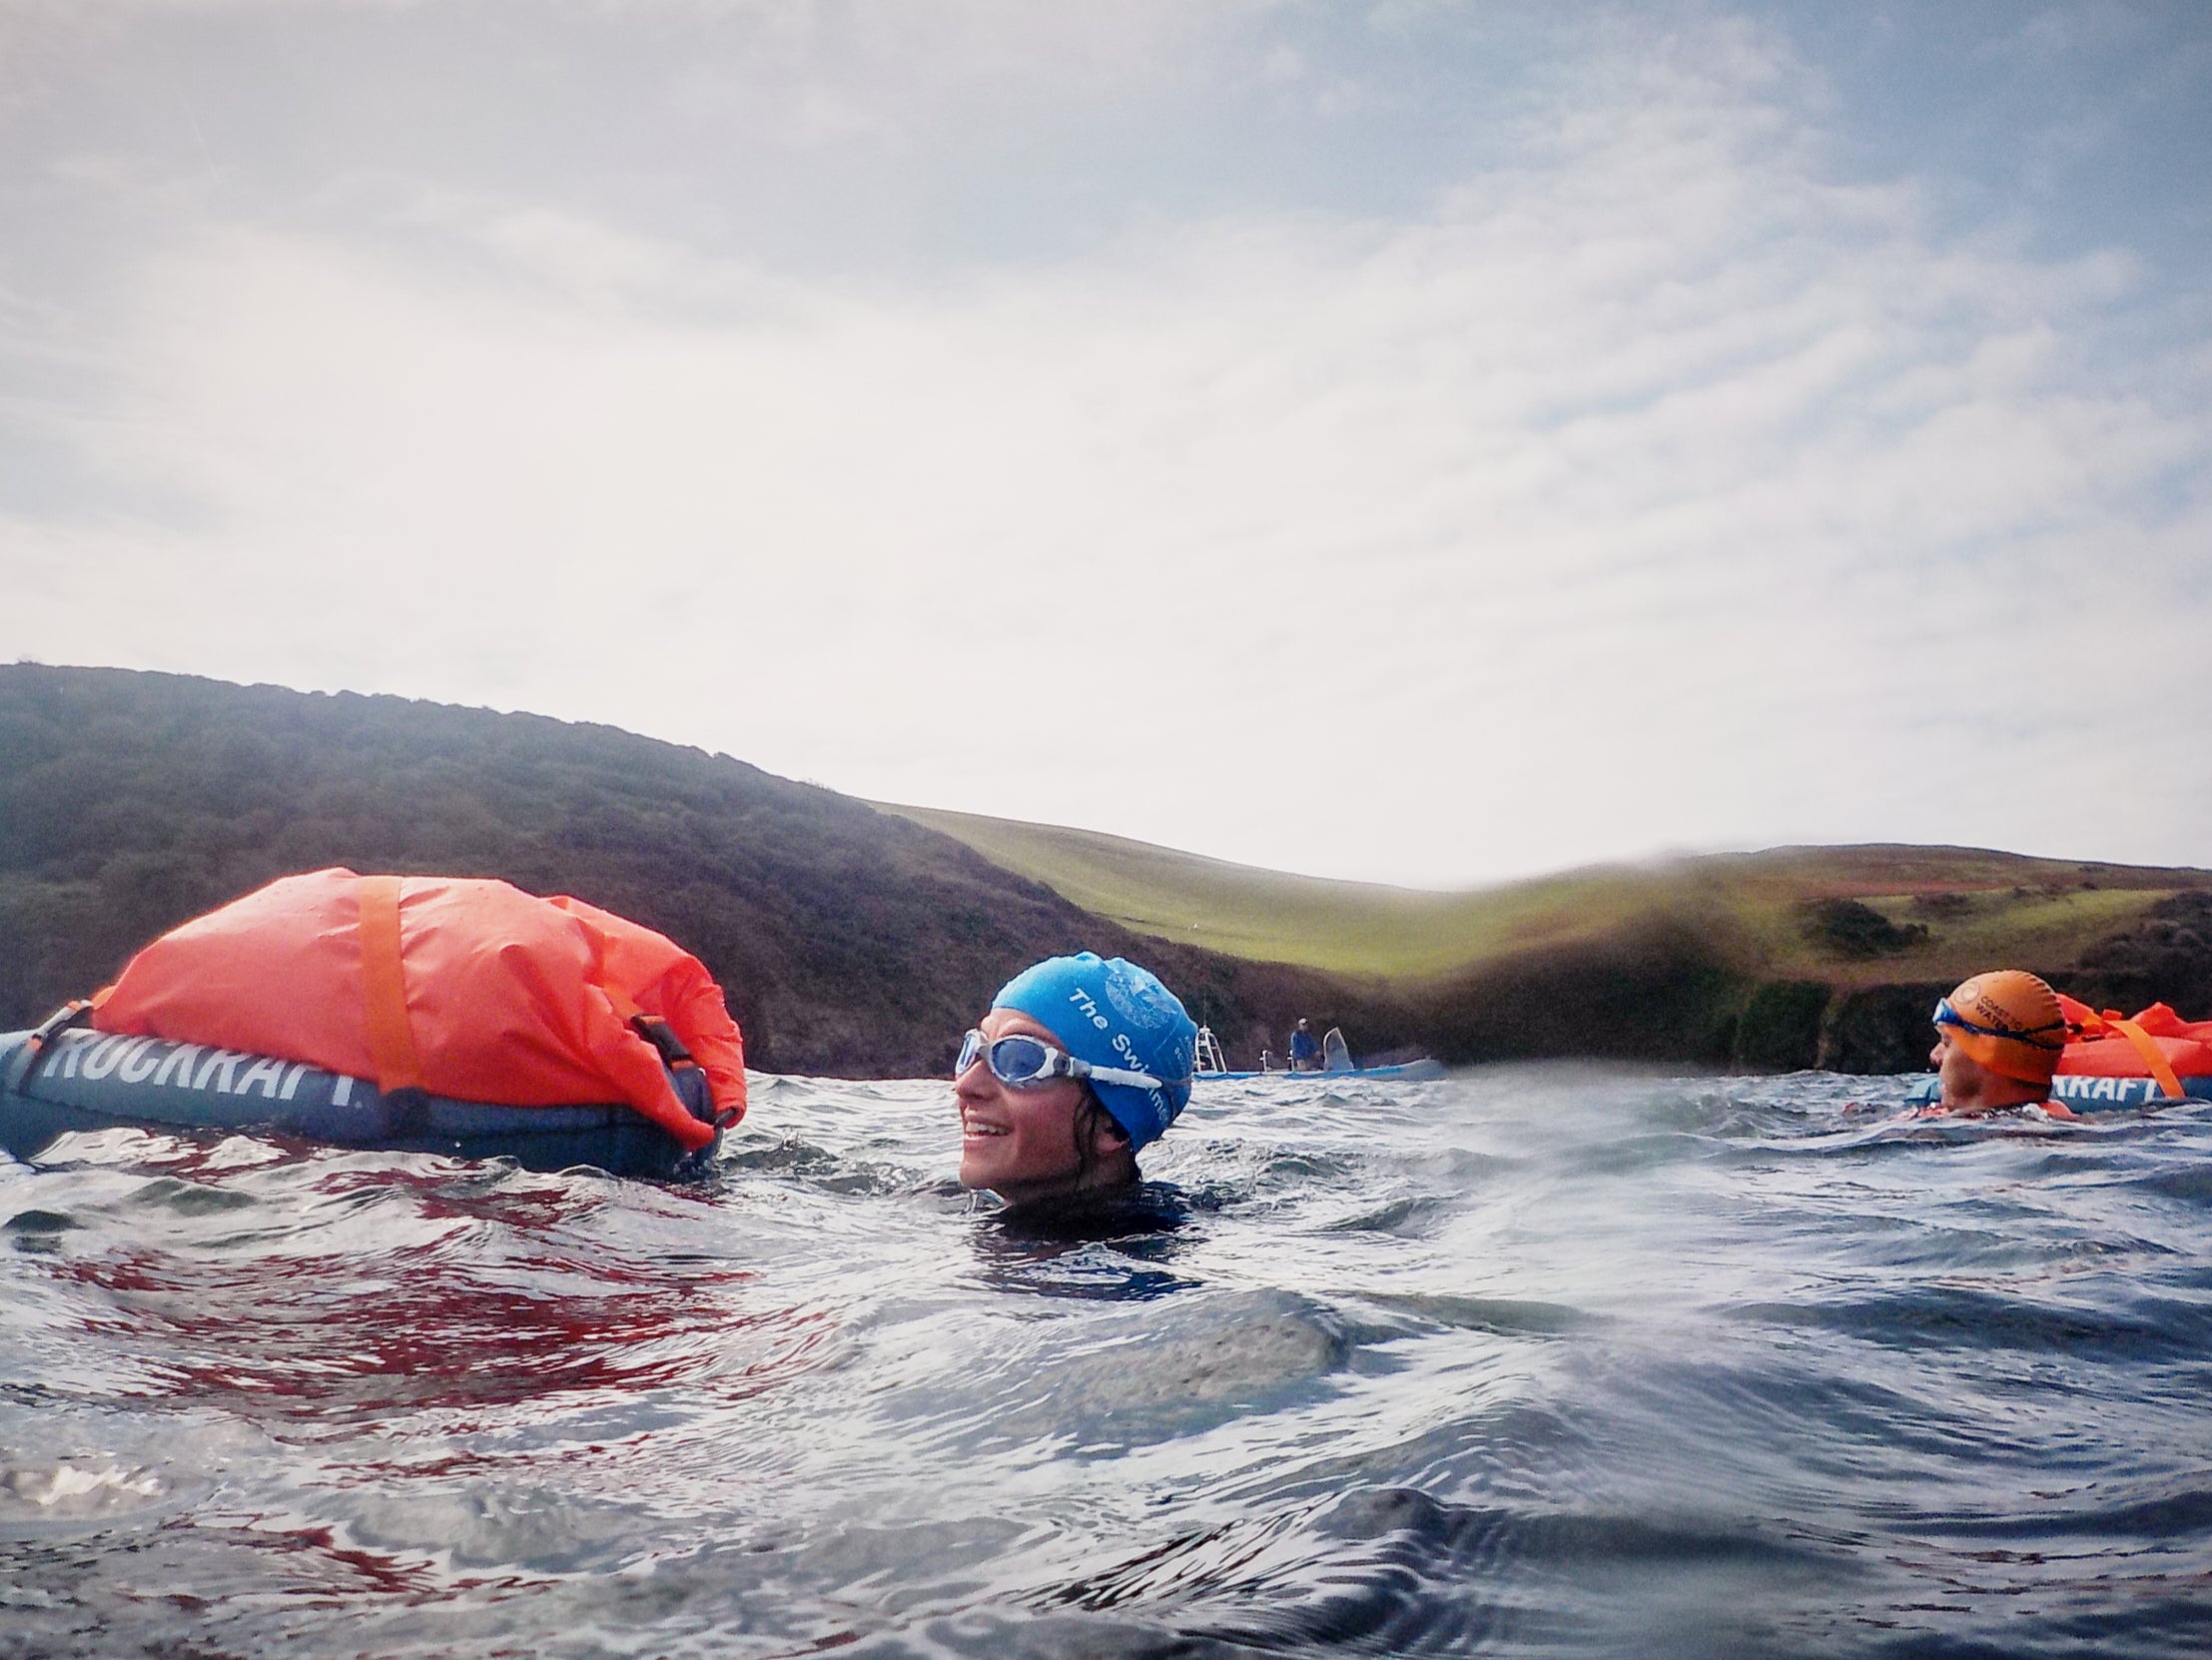 Swim for your supper on a cross-country adventure